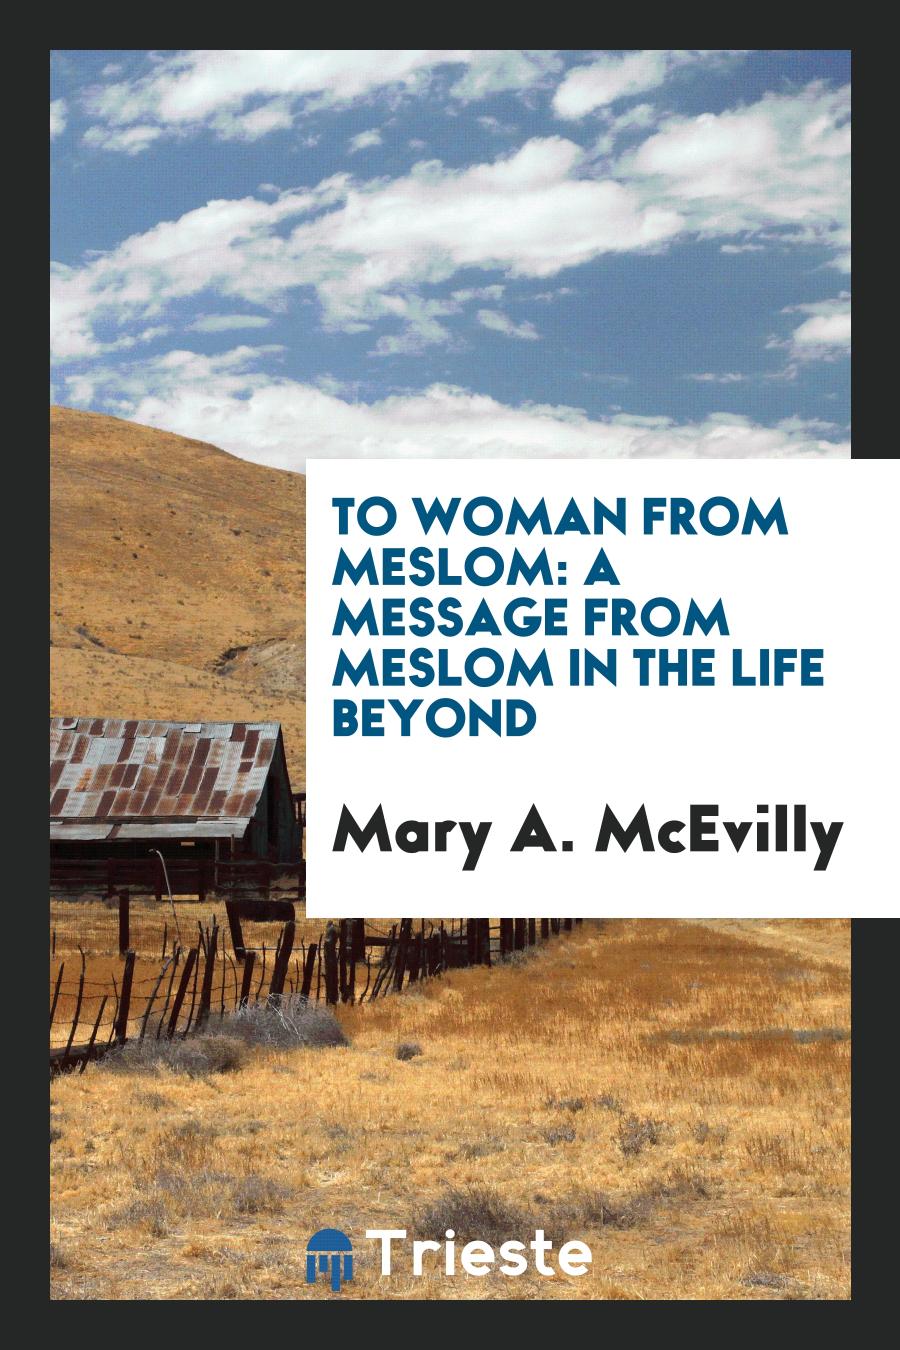 To Woman from Meslom: A Message from Meslom in the Life Beyond